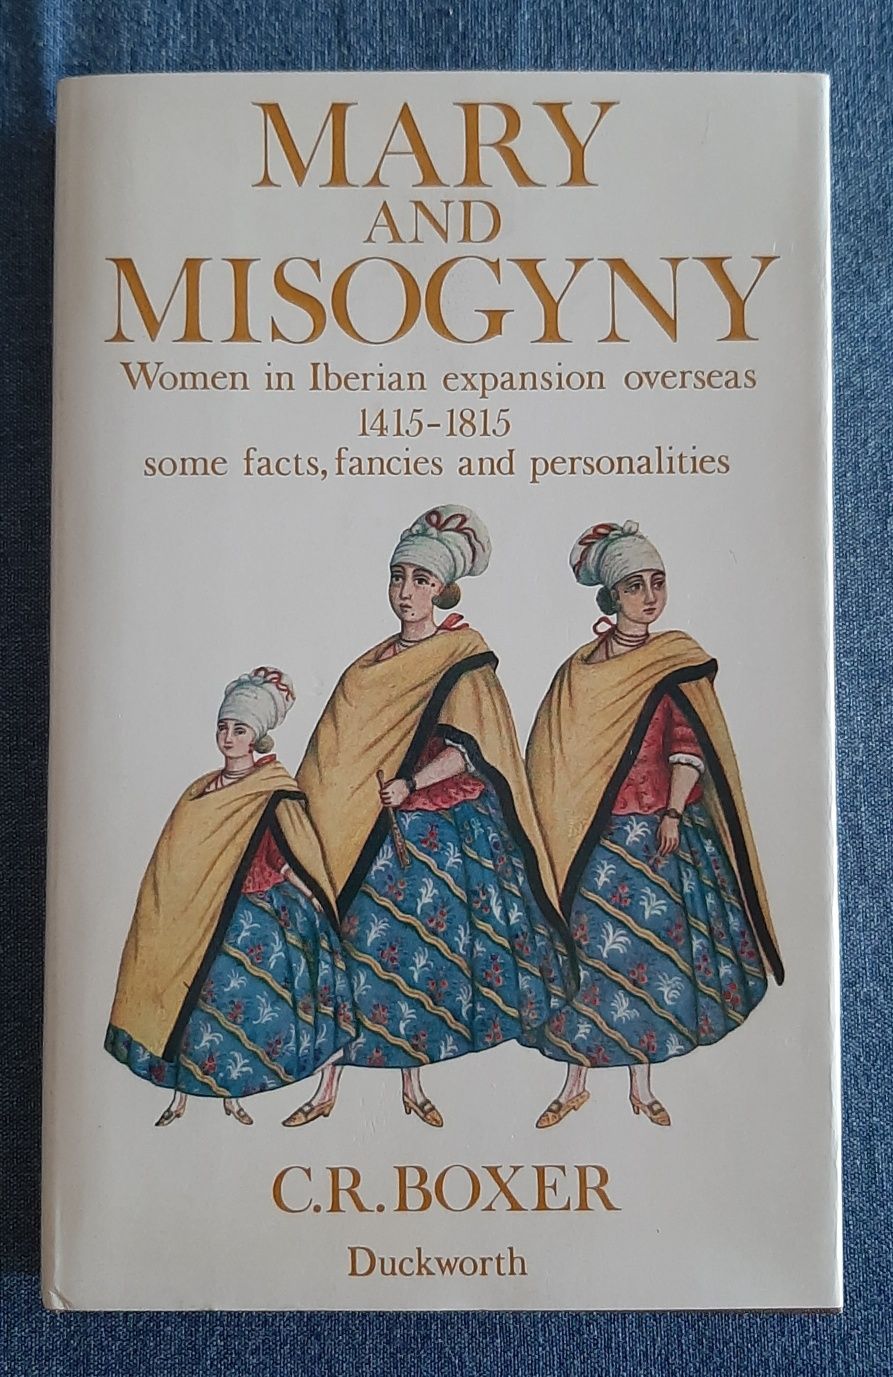 C.R.Boxer: Mary and Misogyny Women in Iberian Expansion Overseas. Raro